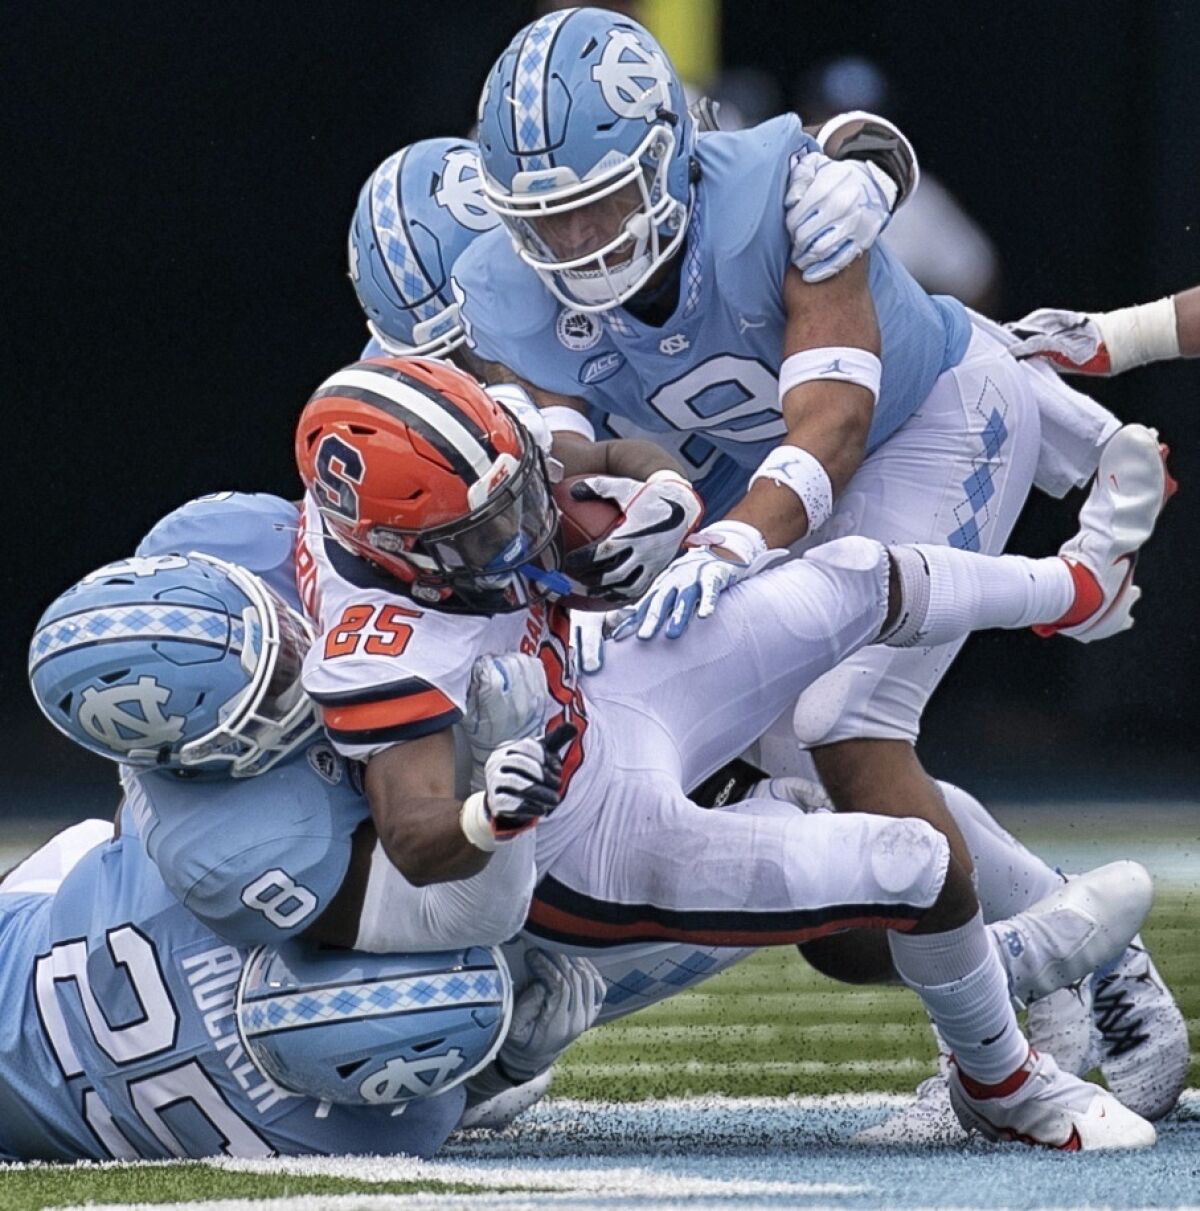 Syracuse running back Jawhar Jordan (25) is stopped by North Carolina's Kaimon Rucker (25), Khadry Jackson (8), and Cam'Ron Kelly (9) in the fourth quarter of an NCAA college football game Saturday, Sept. 12, 2020 in Chapel Hill, N.C. (Robert Willett/The News & Observer via AP, Pool)